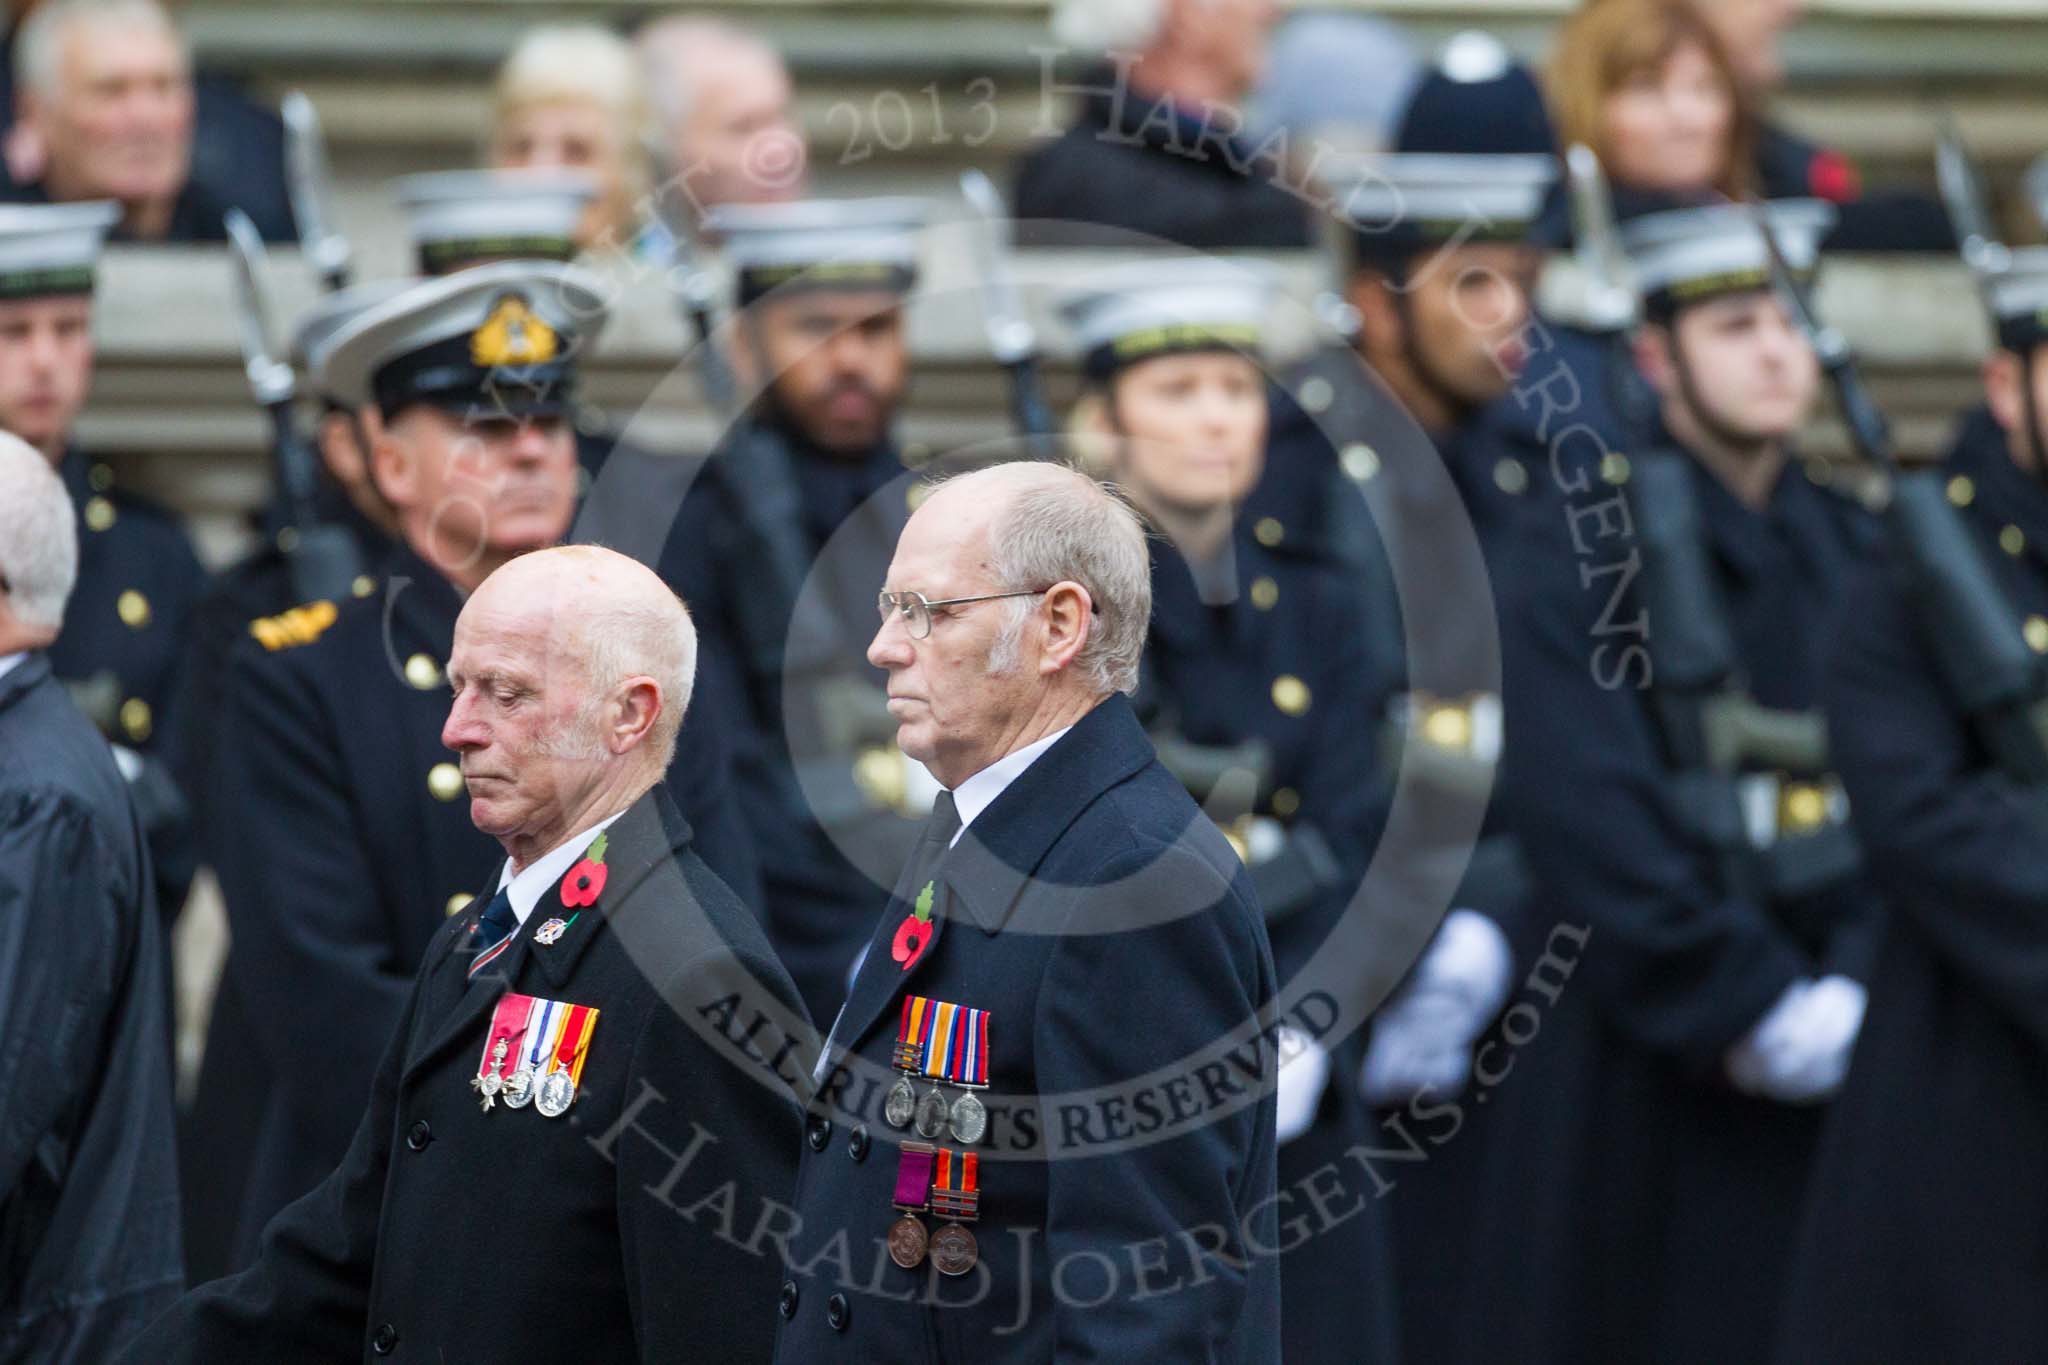 Remembrance Sunday at the Cenotaph 2015: Group M18, The Firefighters Memorial Trust.
Cenotaph, Whitehall, London SW1,
London,
Greater London,
United Kingdom,
on 08 November 2015 at 12:16, image #1524